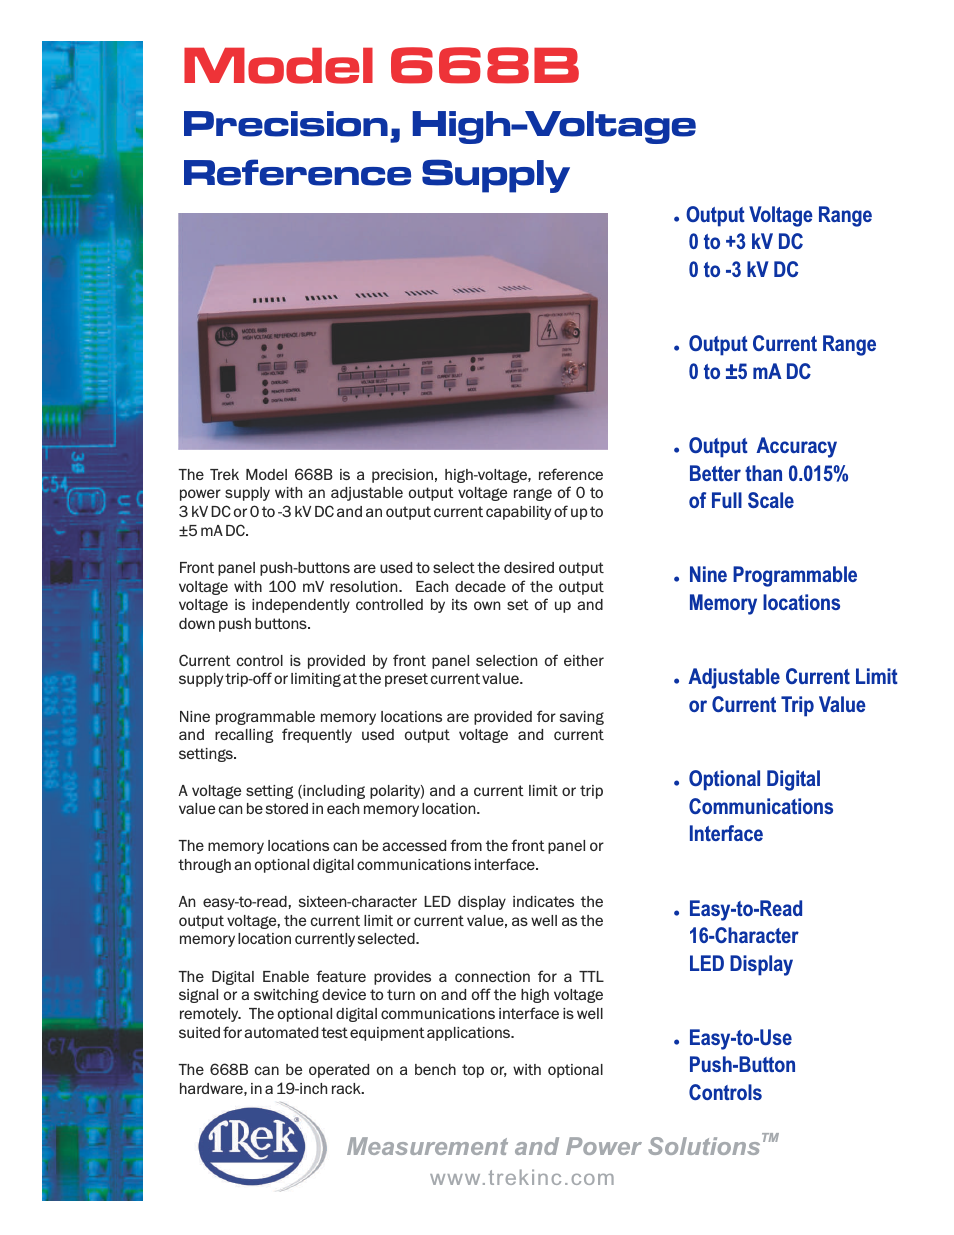 668B High-Voltage Reference Supply